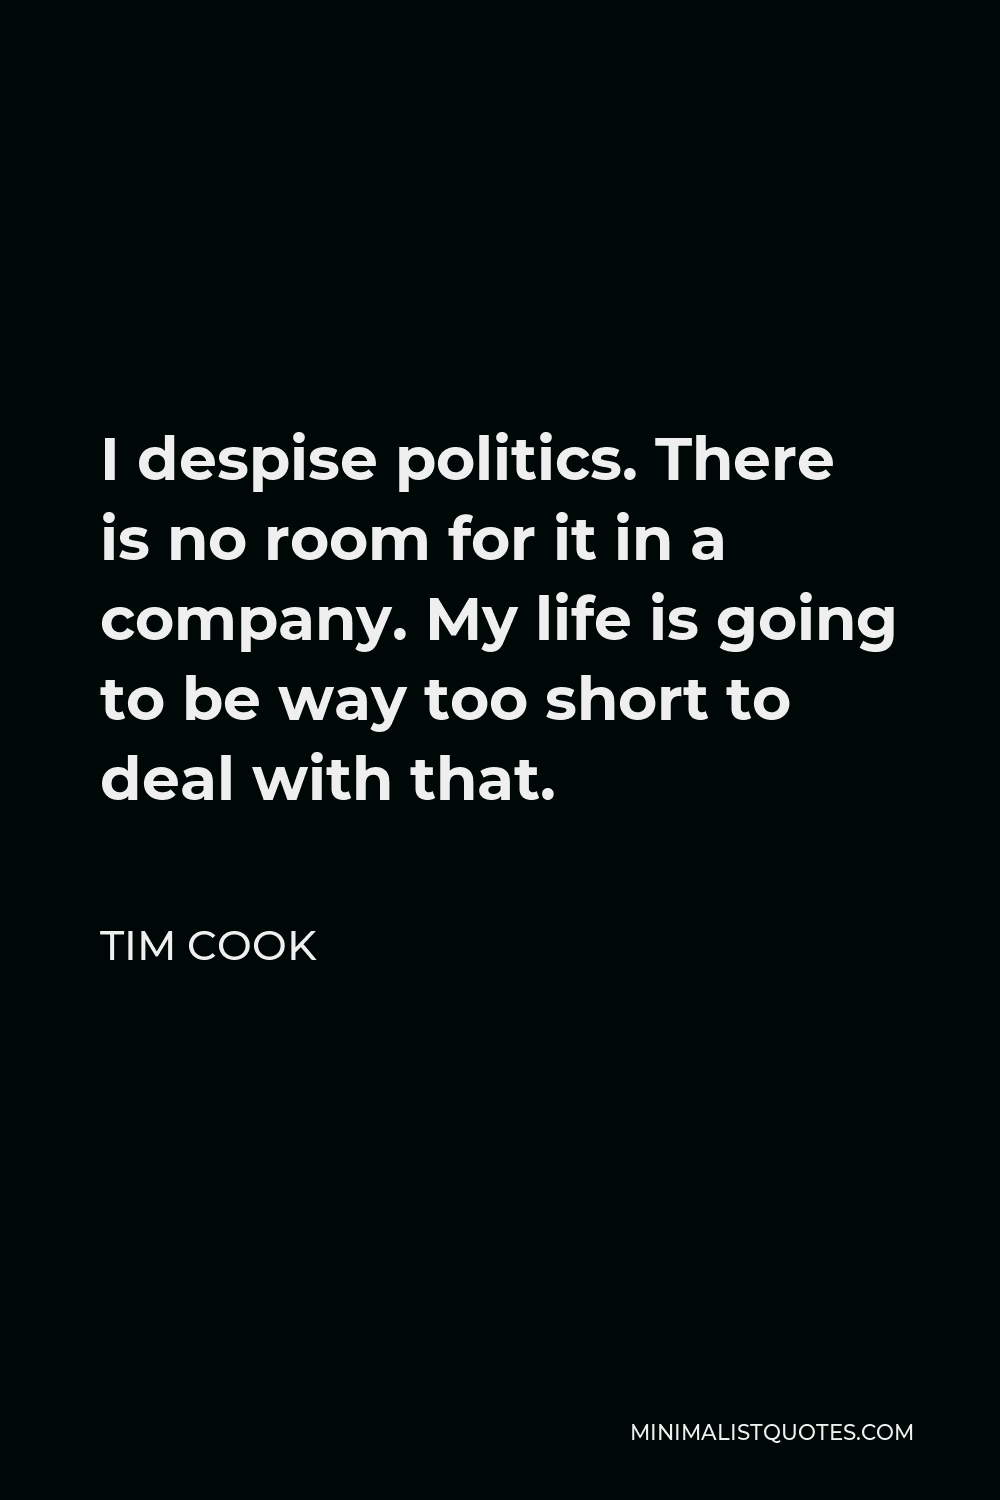 Tim Cook Quote - I despise politics. There is no room for it in a company. My life is going to be way too short to deal with that.